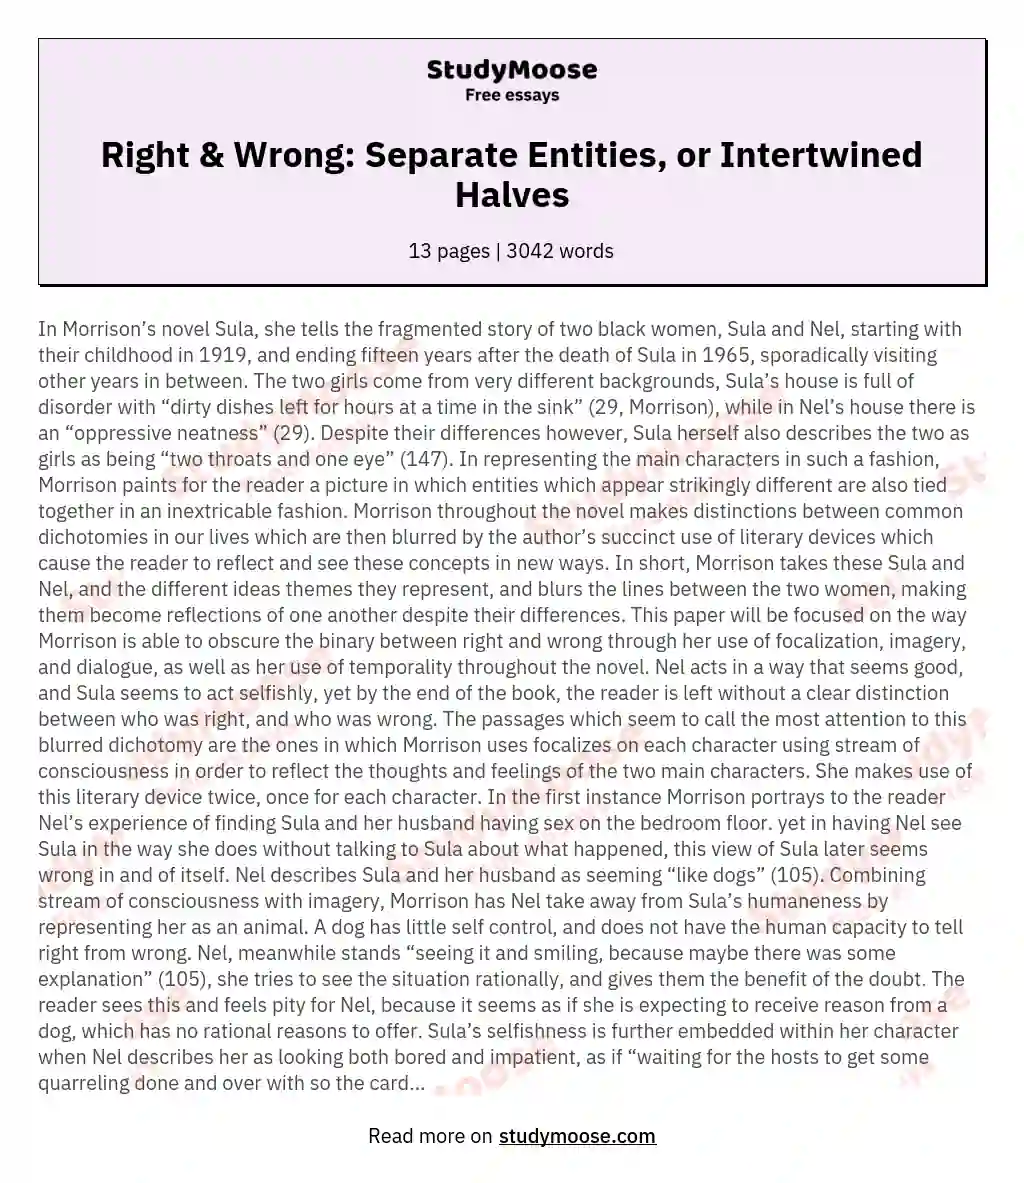 Right & Wrong: Separate Entities, or Intertwined Halves essay